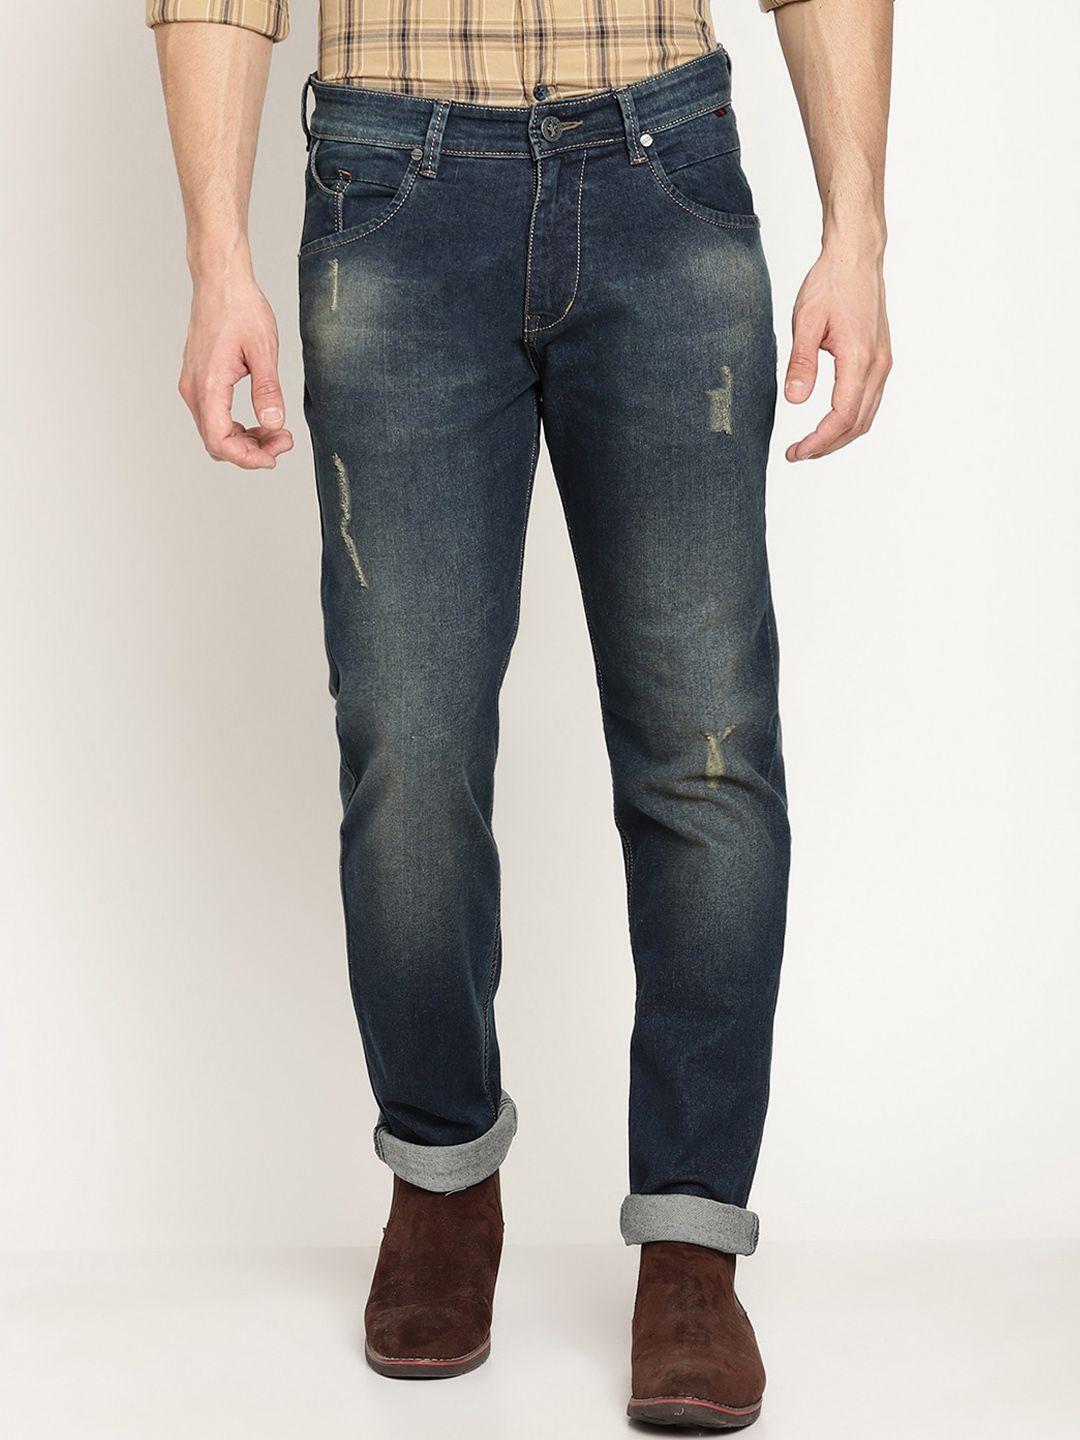 cantabil-men-mid-rise-mildly-distressed-heavy-fade-stretchable-cotton-jeans